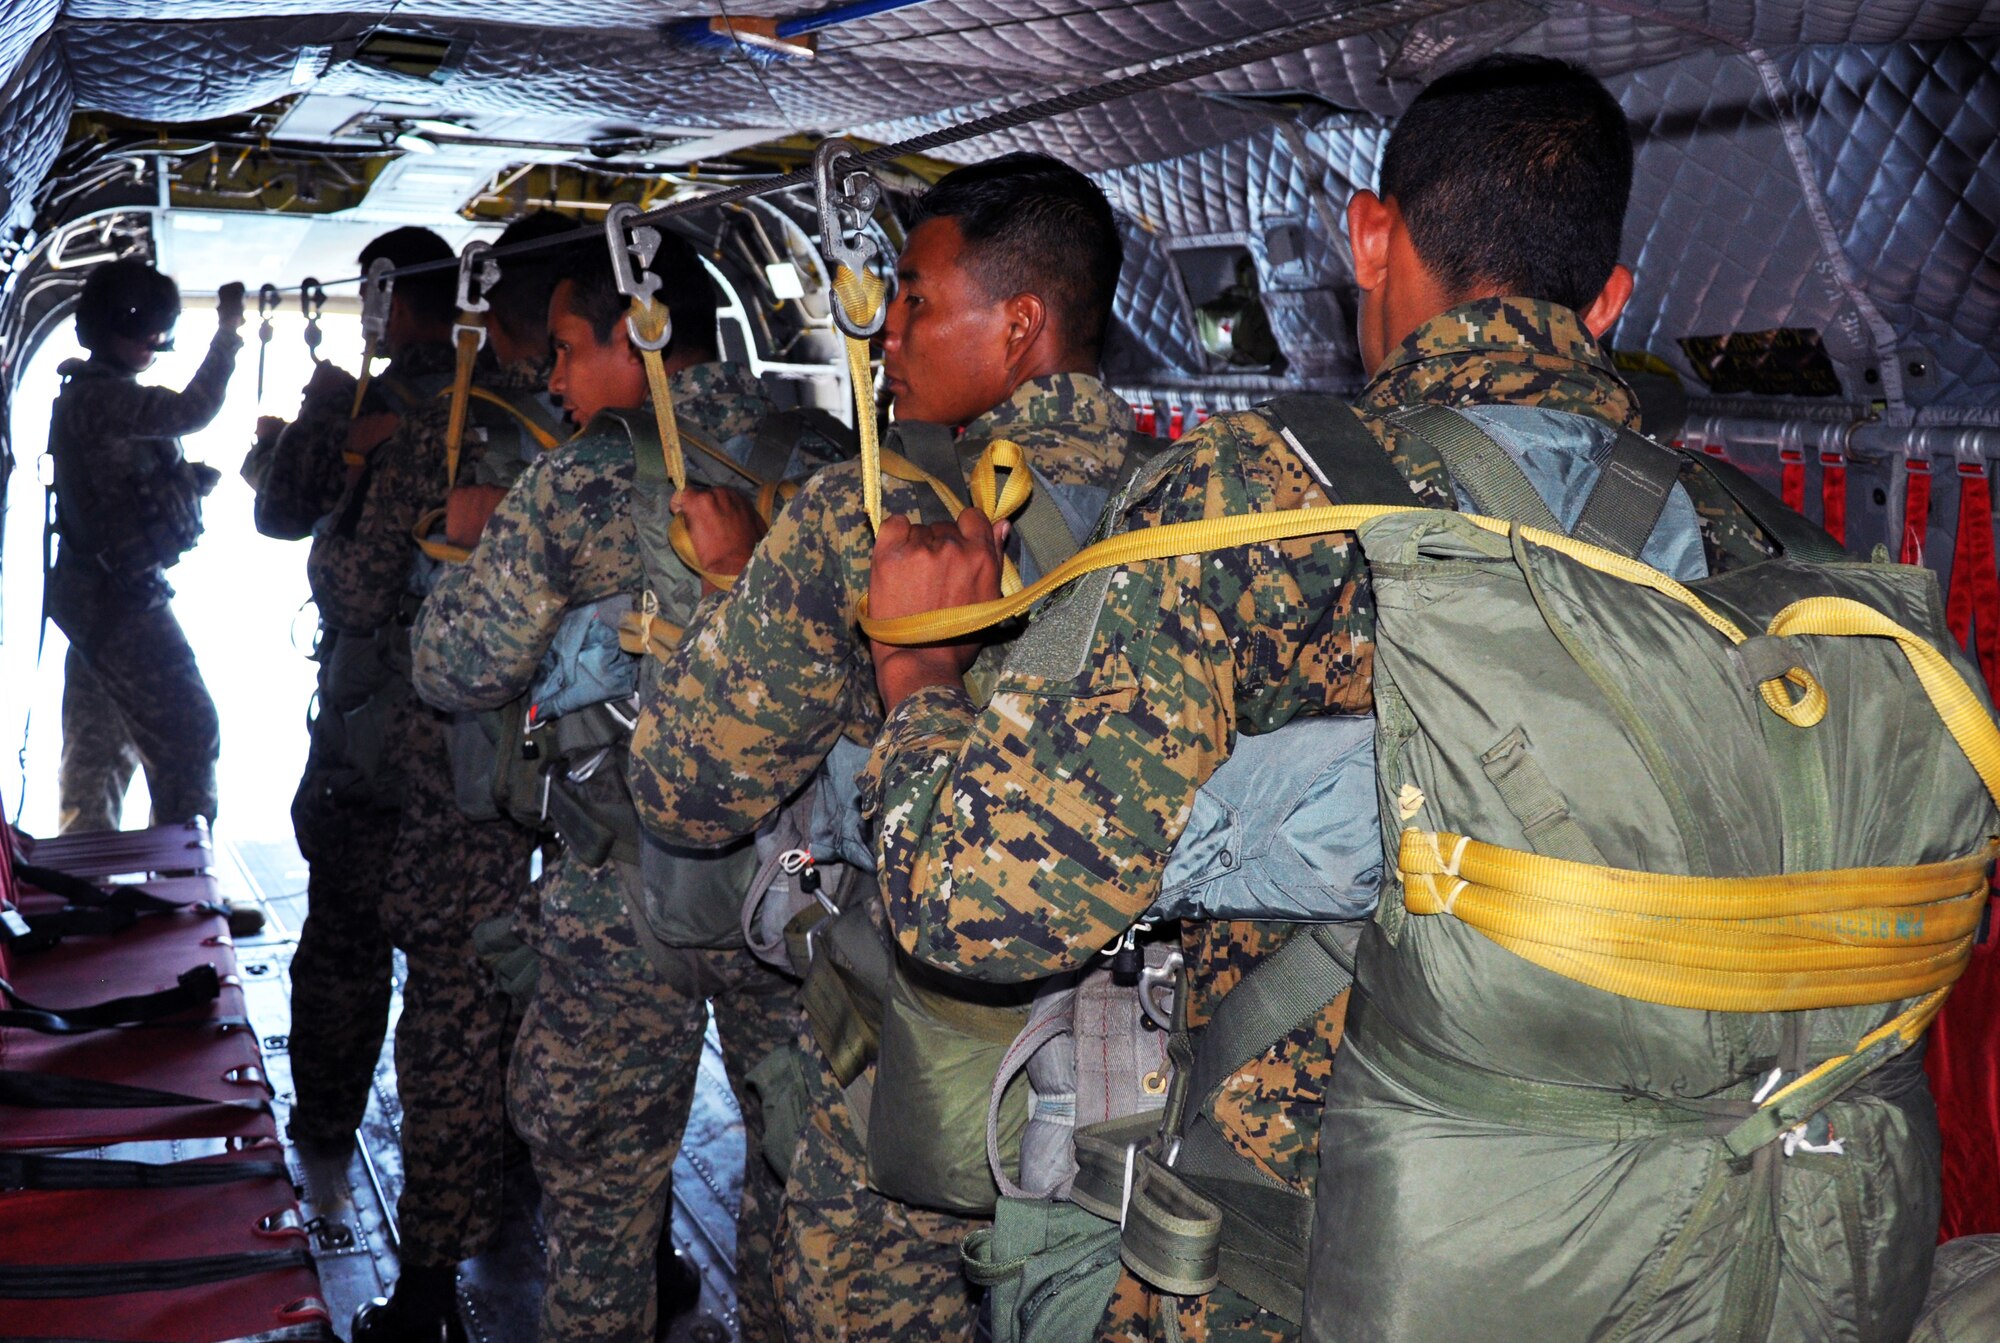 El Salvadoran military members wait to jump from the ramp of a CH-47 Chinook helicopter at an altitude of 1,250 feet during a joint airborne operations training exercise conducted by U.S. Special Forces and El Salvadoran servicemembers over Lake Ilopango, El Salvador, Jan. 21, 2014.  U.S. Special Forces from the 7th Special Forces Group (Airborne) conducted the training exercise alongside members of the El Salvadoran military.  The joint-training, overwater static jump allowed members from both nations to maintain currency while strengthening the relationship between the U.S. and El Salvadoran forces.  Joint Task Force-Bravo’s 1-228th Aviation Regiment provided aerial support for the exercise, flying each chalk of jumpers from the Ilopango International Airport to the drop zone over Lake Ilopango.  (U.S. Air Force photo by Capt. Zach Anderson)